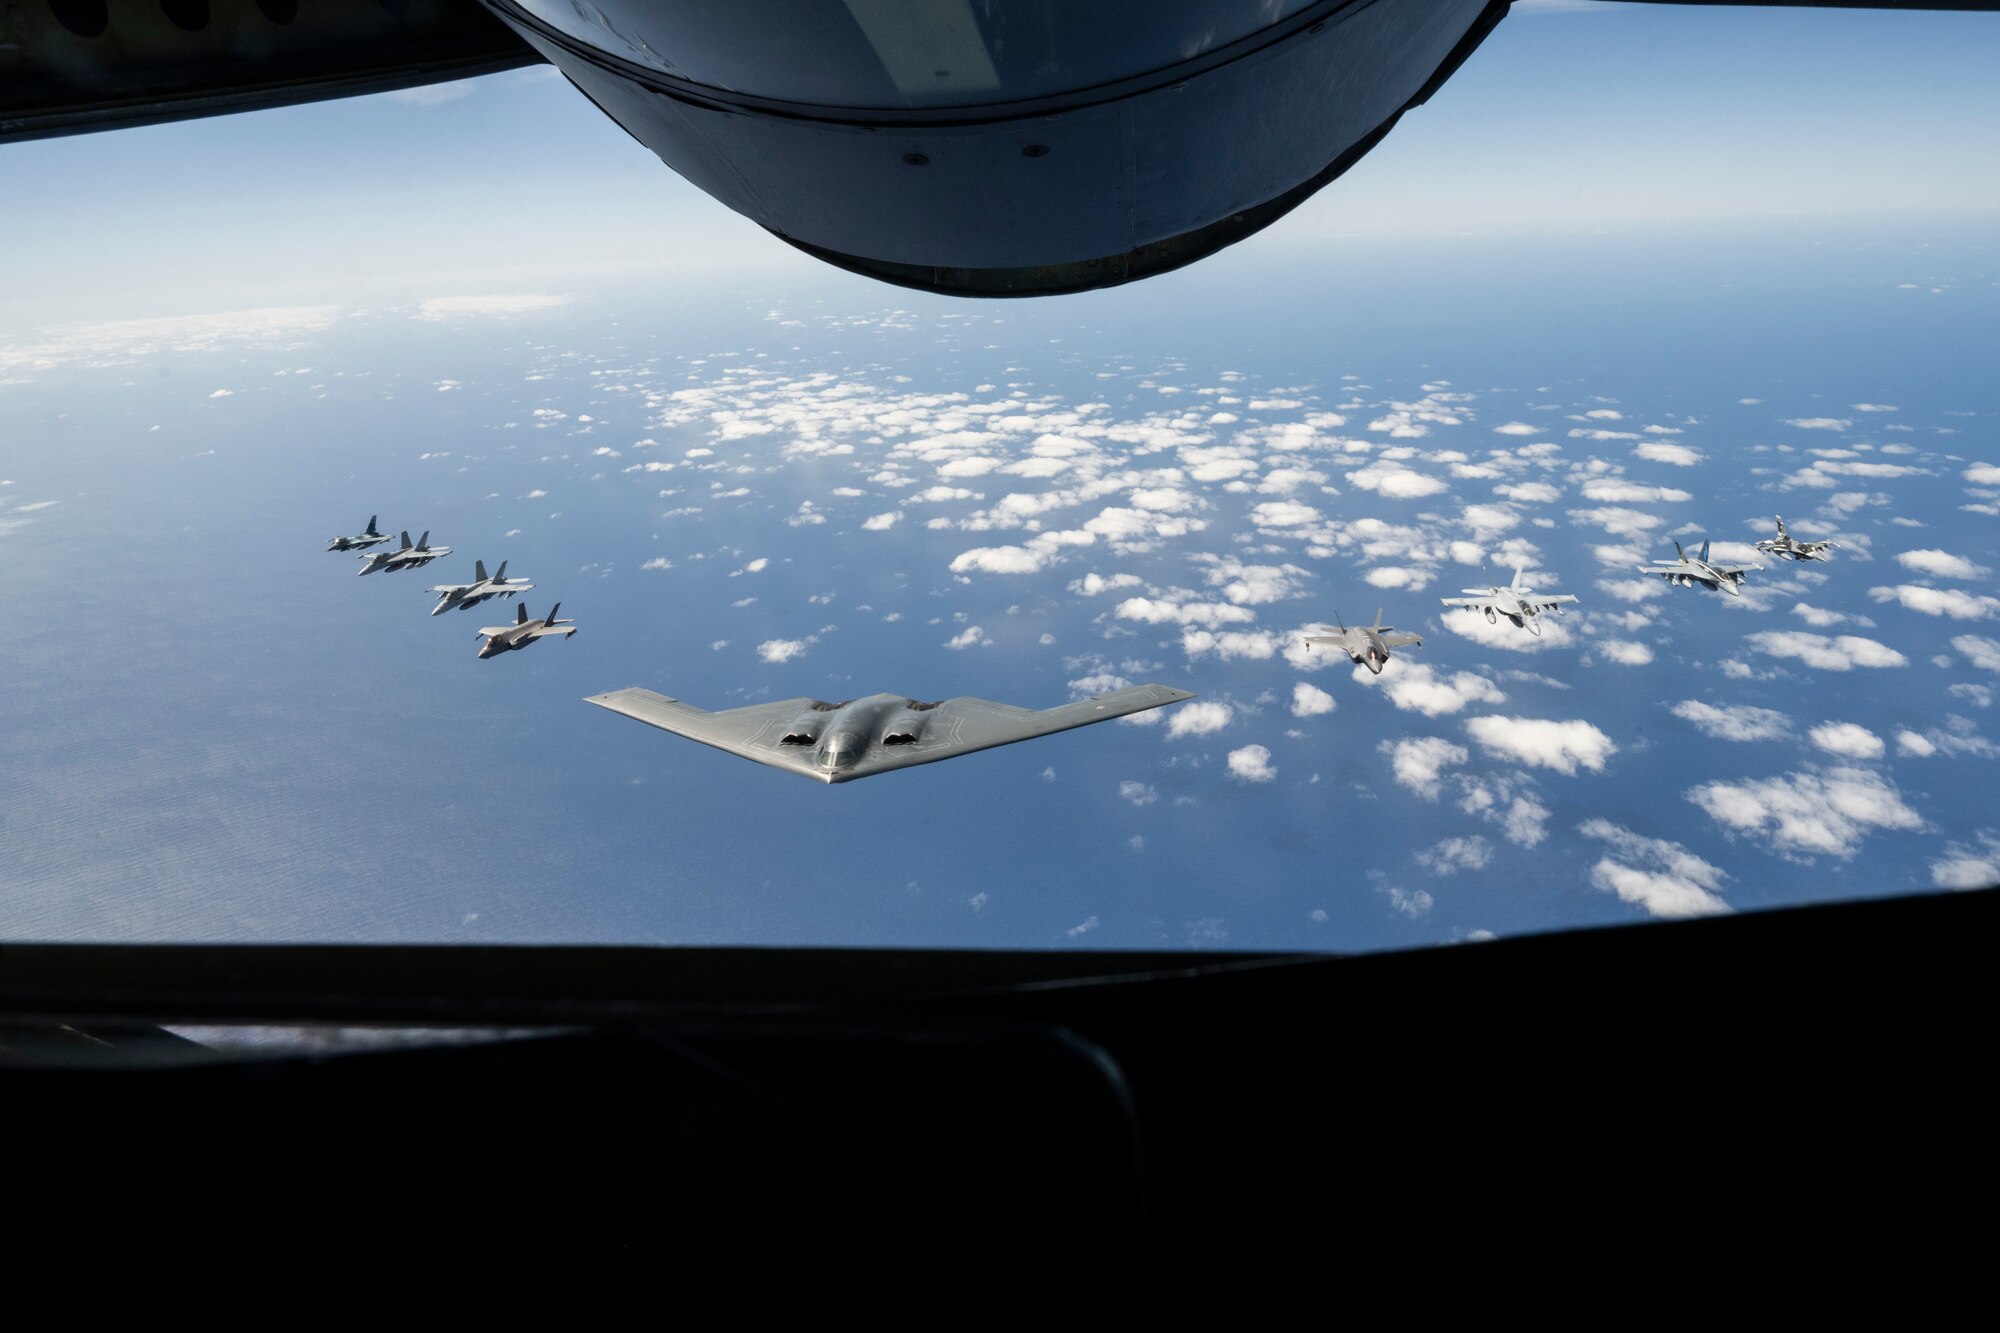 A U.S. Air force B-2 Spirit from Whiteman Air Force Base, Missouri, flies in formation with two Royal Australian Air Force F-35A Lightning IIs, two RAAF F/A-18F Super Hornets, two RAAF EA-18 Growlers, and two U.S. Air Force F-16C Aggressors from Eielson Air Force Base, Alaska during a training mission in the Indo-Pacific region, March 23, 2022. During the more than 50-hour round-trip trek to Australia and back, the B-2 received aerial refueling from numerous tanker aircraft—ensuring the mission was successful and further demonstrating the U.S. Air Forces’ global strike capabilities. (U.S. Air Force photo by Tech. Sgt. Hailey Haux)